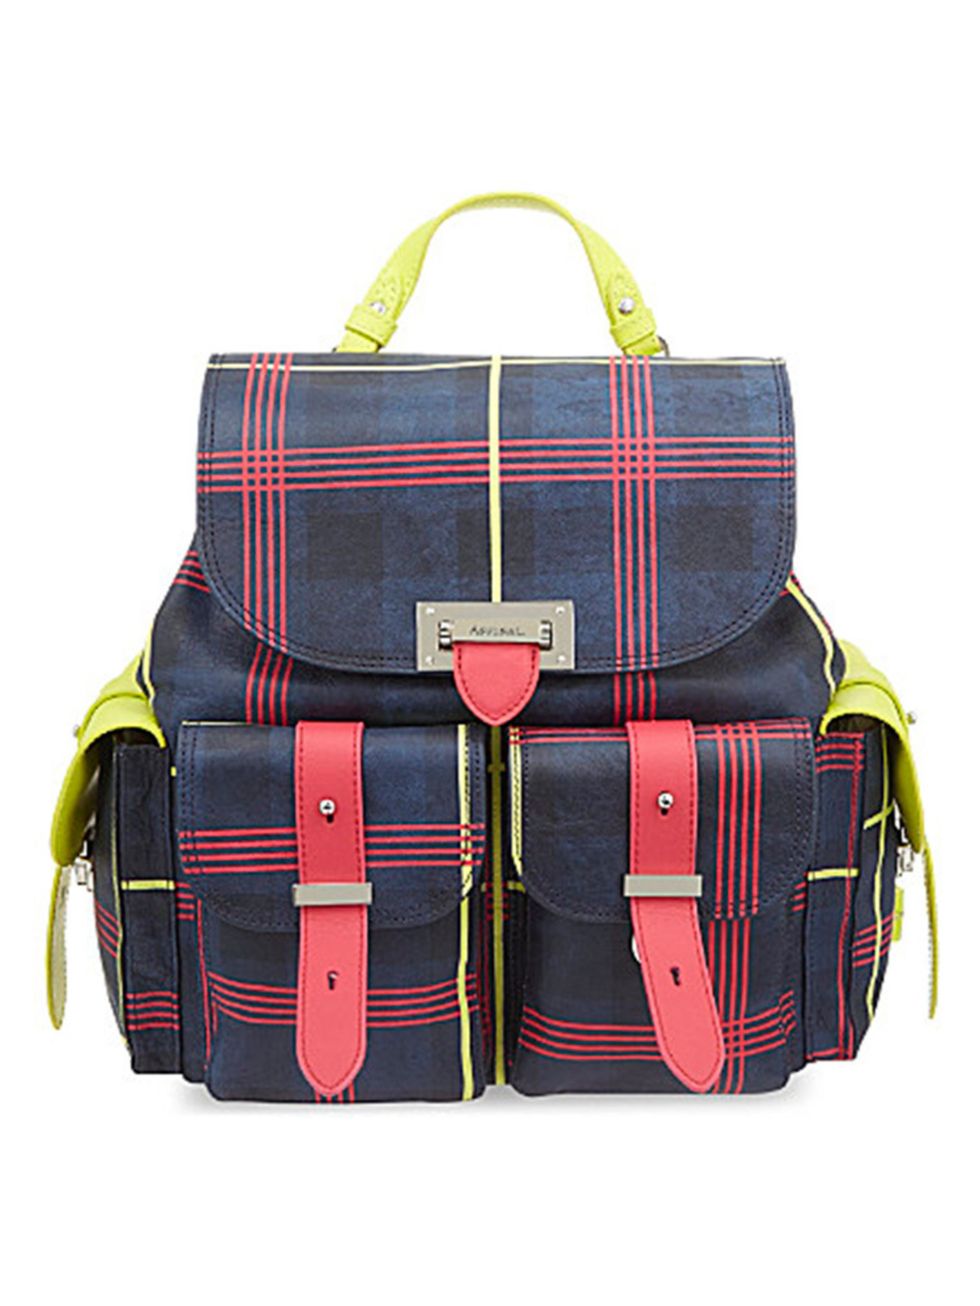 <p>Aspinal backpack, £695, exclusive to <a href="http://www.selfridges.com/GB/en/cat/aspinal-plaid-leather-backpack_133-3004426-042173516570000/?previewAttribute=Navy" target="_blank">Selfridges</a> </p>